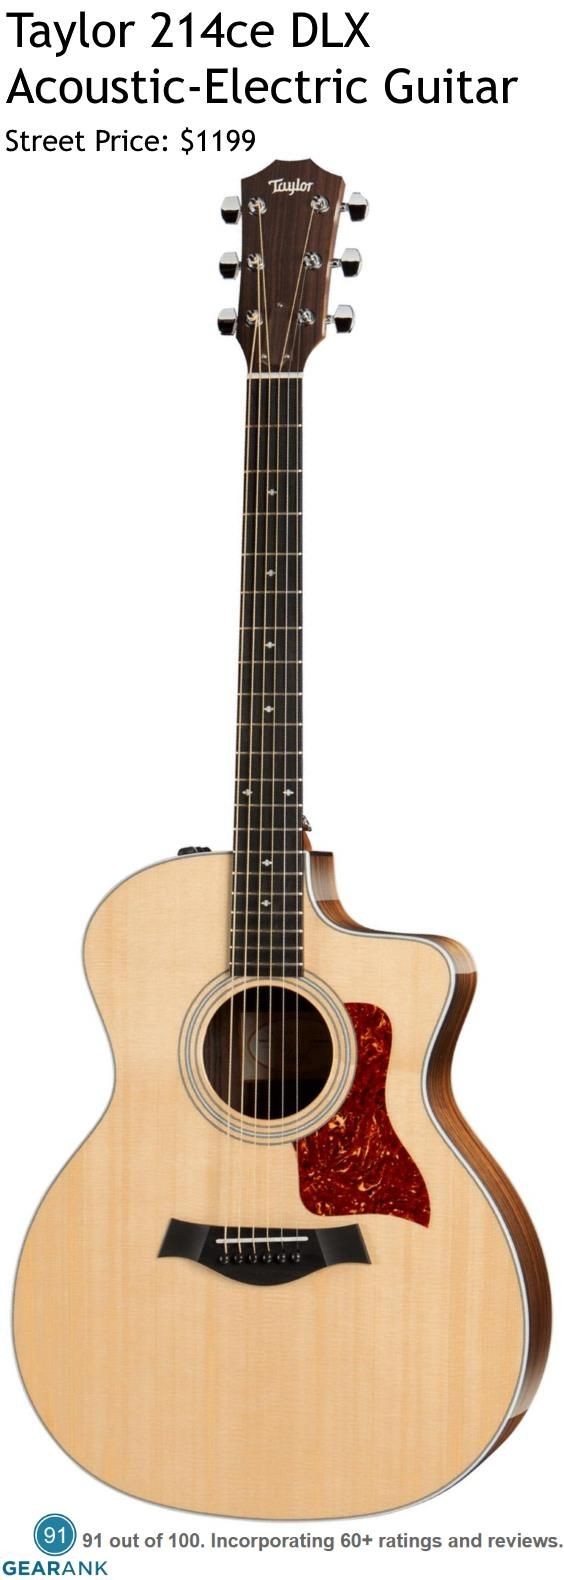 Taylor 214ce DLX Acoustic Electric Guitar It has a solid Sitka spruce top along